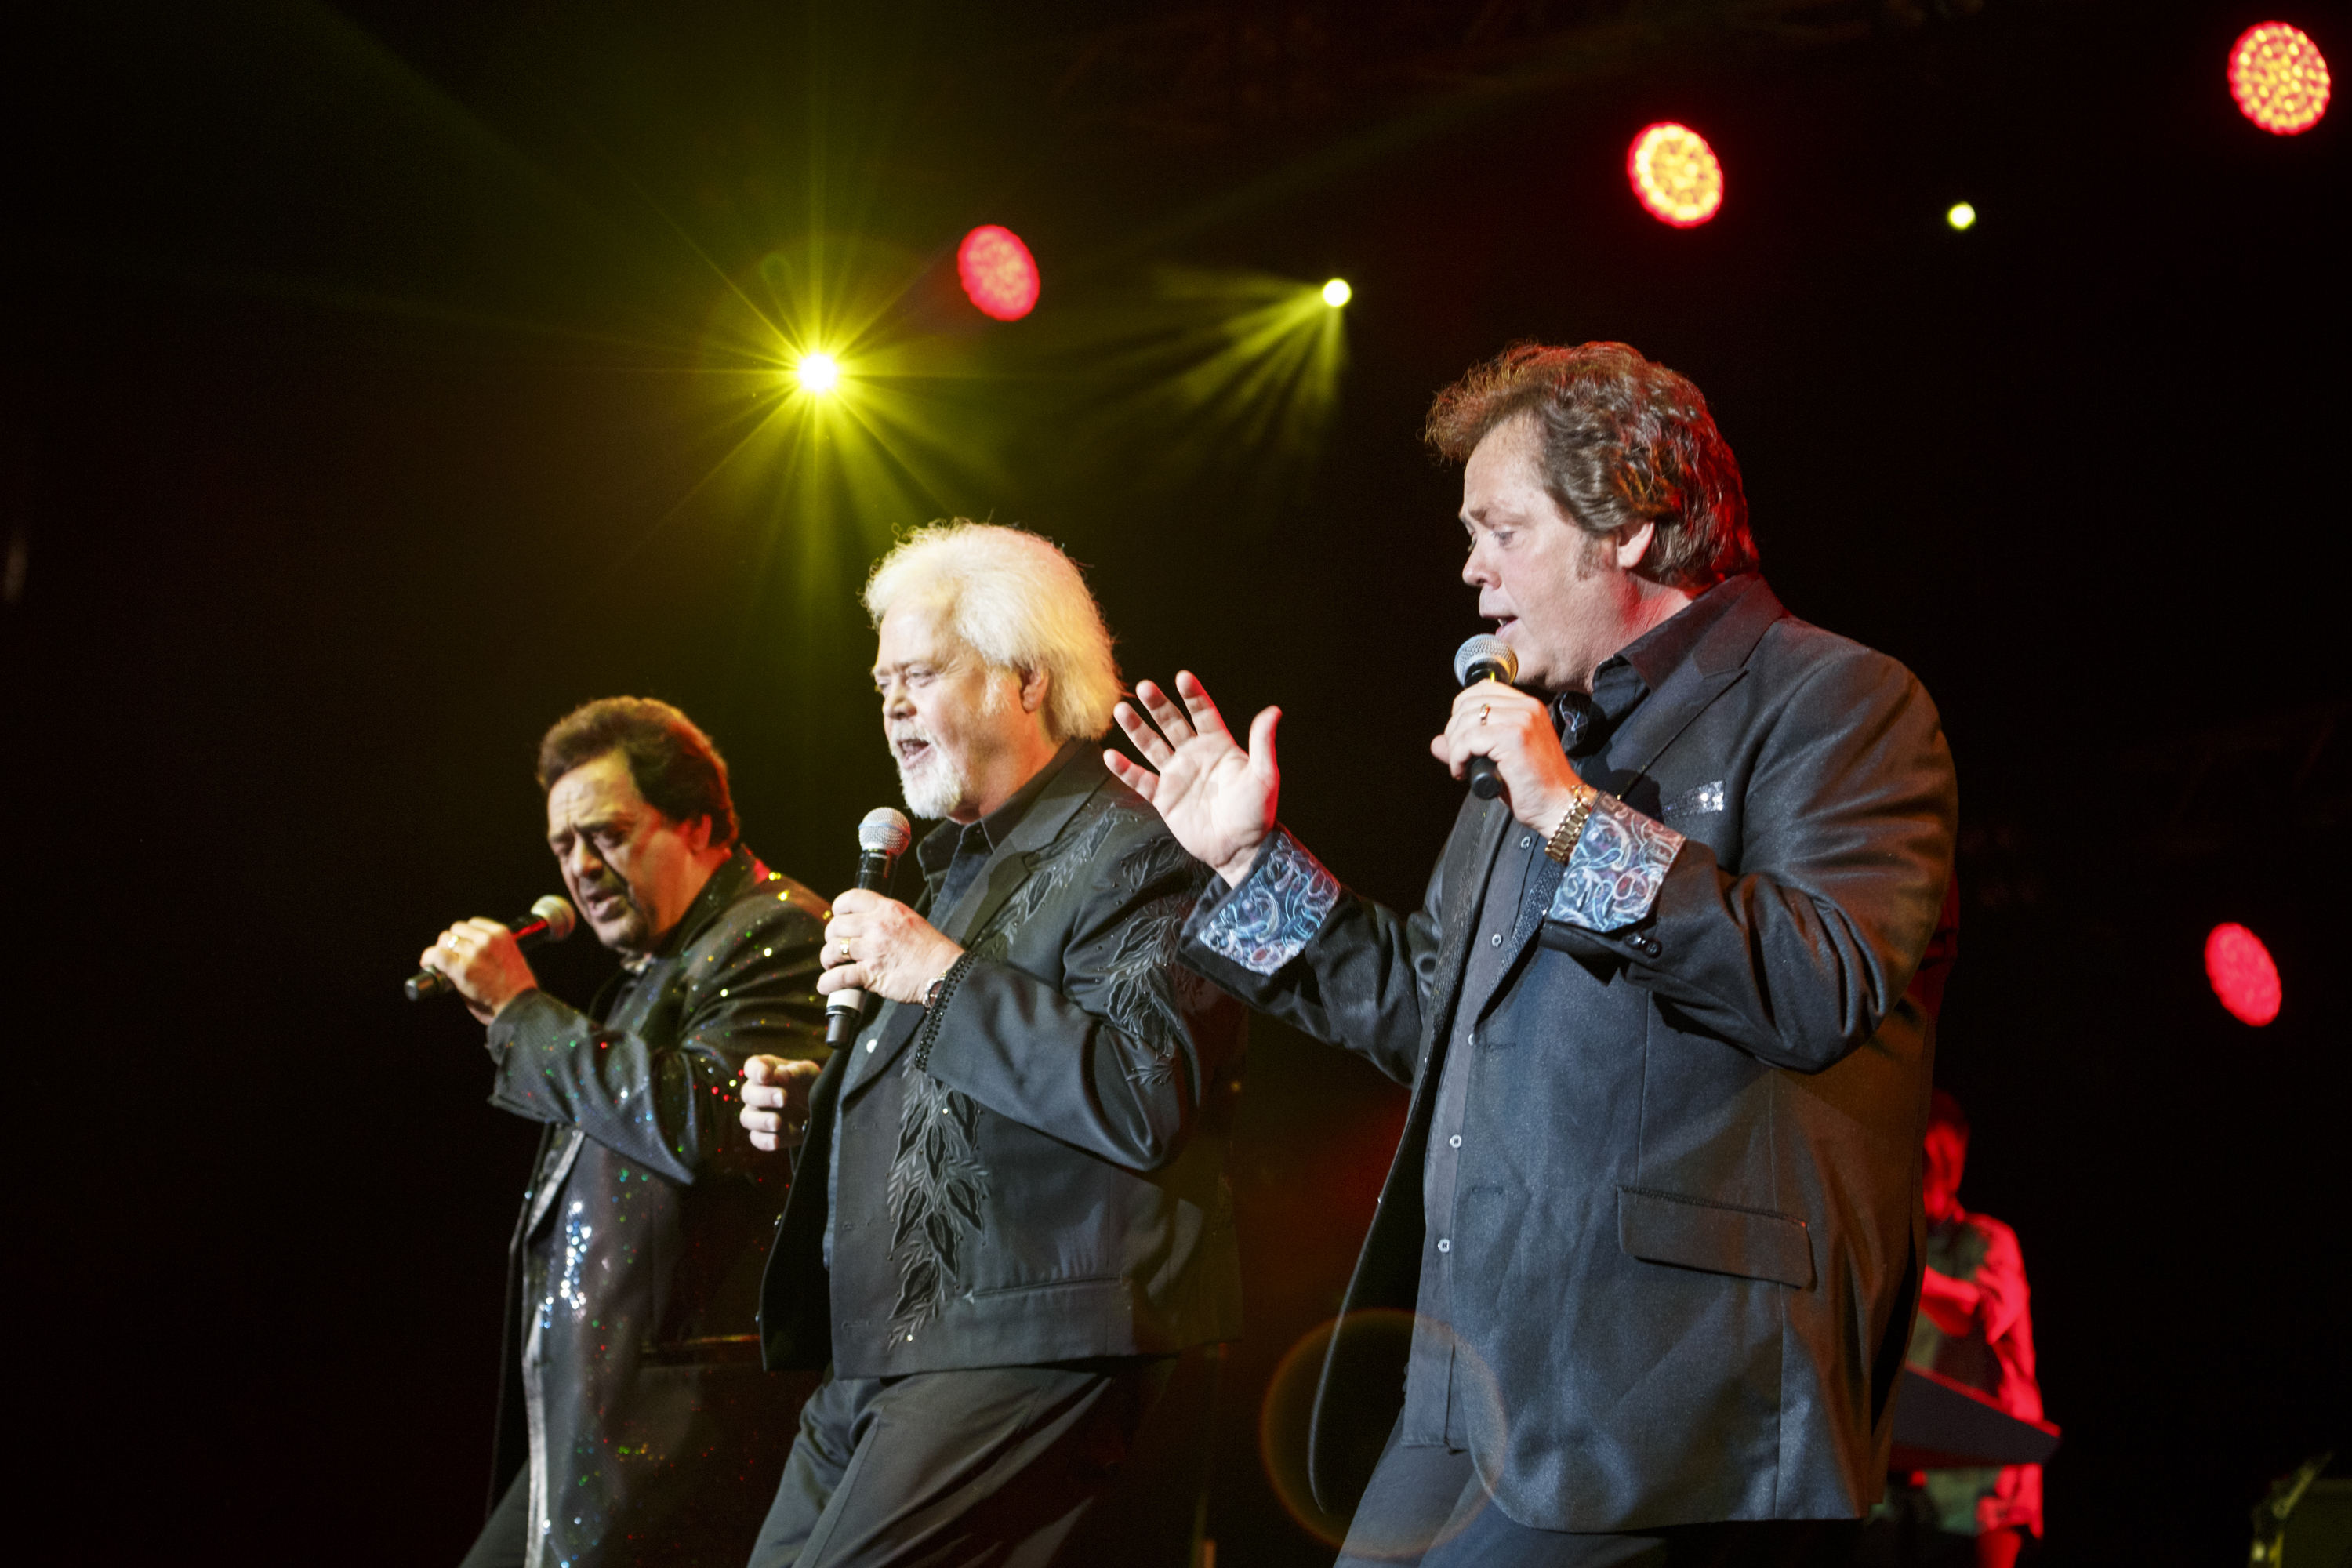 Jay Osmond, Merrill Osmond, and Jimmy Osmond performing at Phones 4 U Arena in Manchester, United Kingdom, on June 20, 2014. | Source: Getty Images